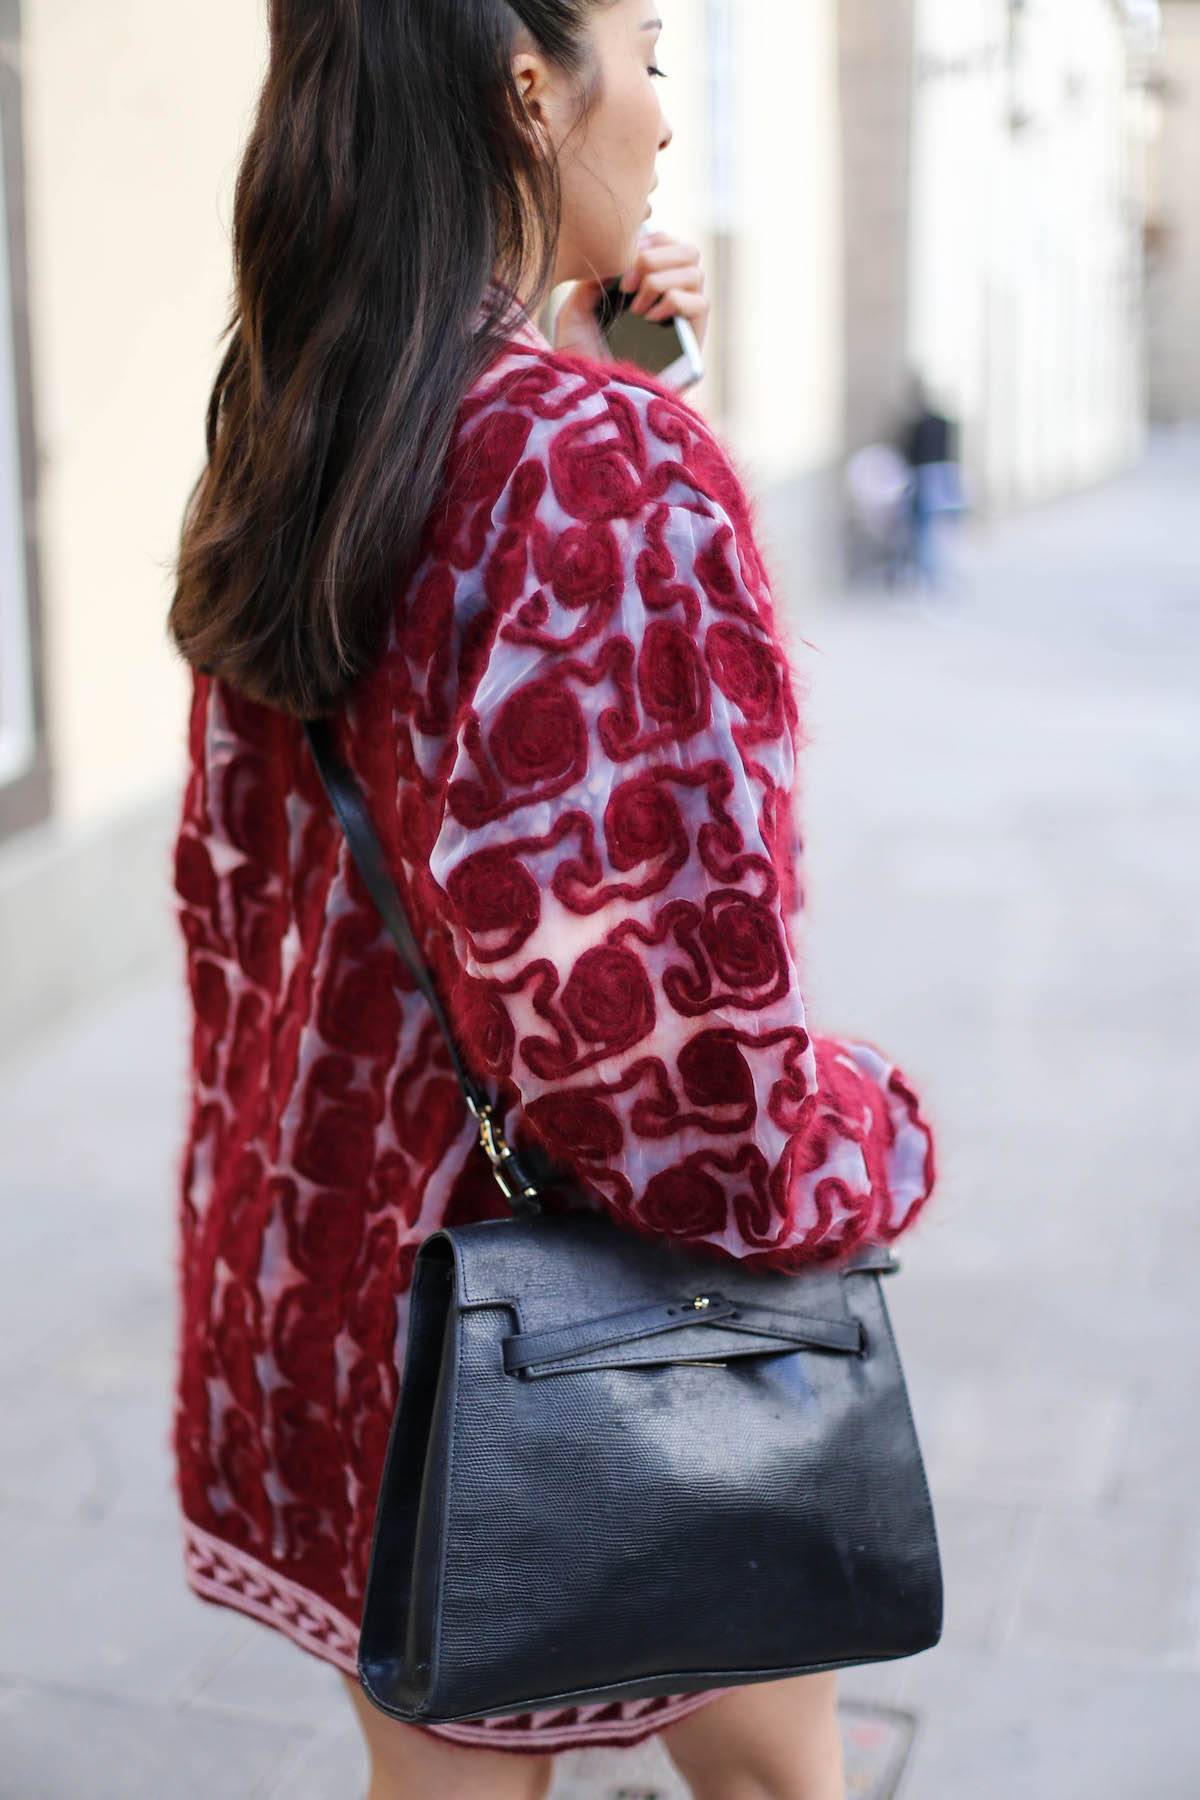 The Patterned Summer Coat 1